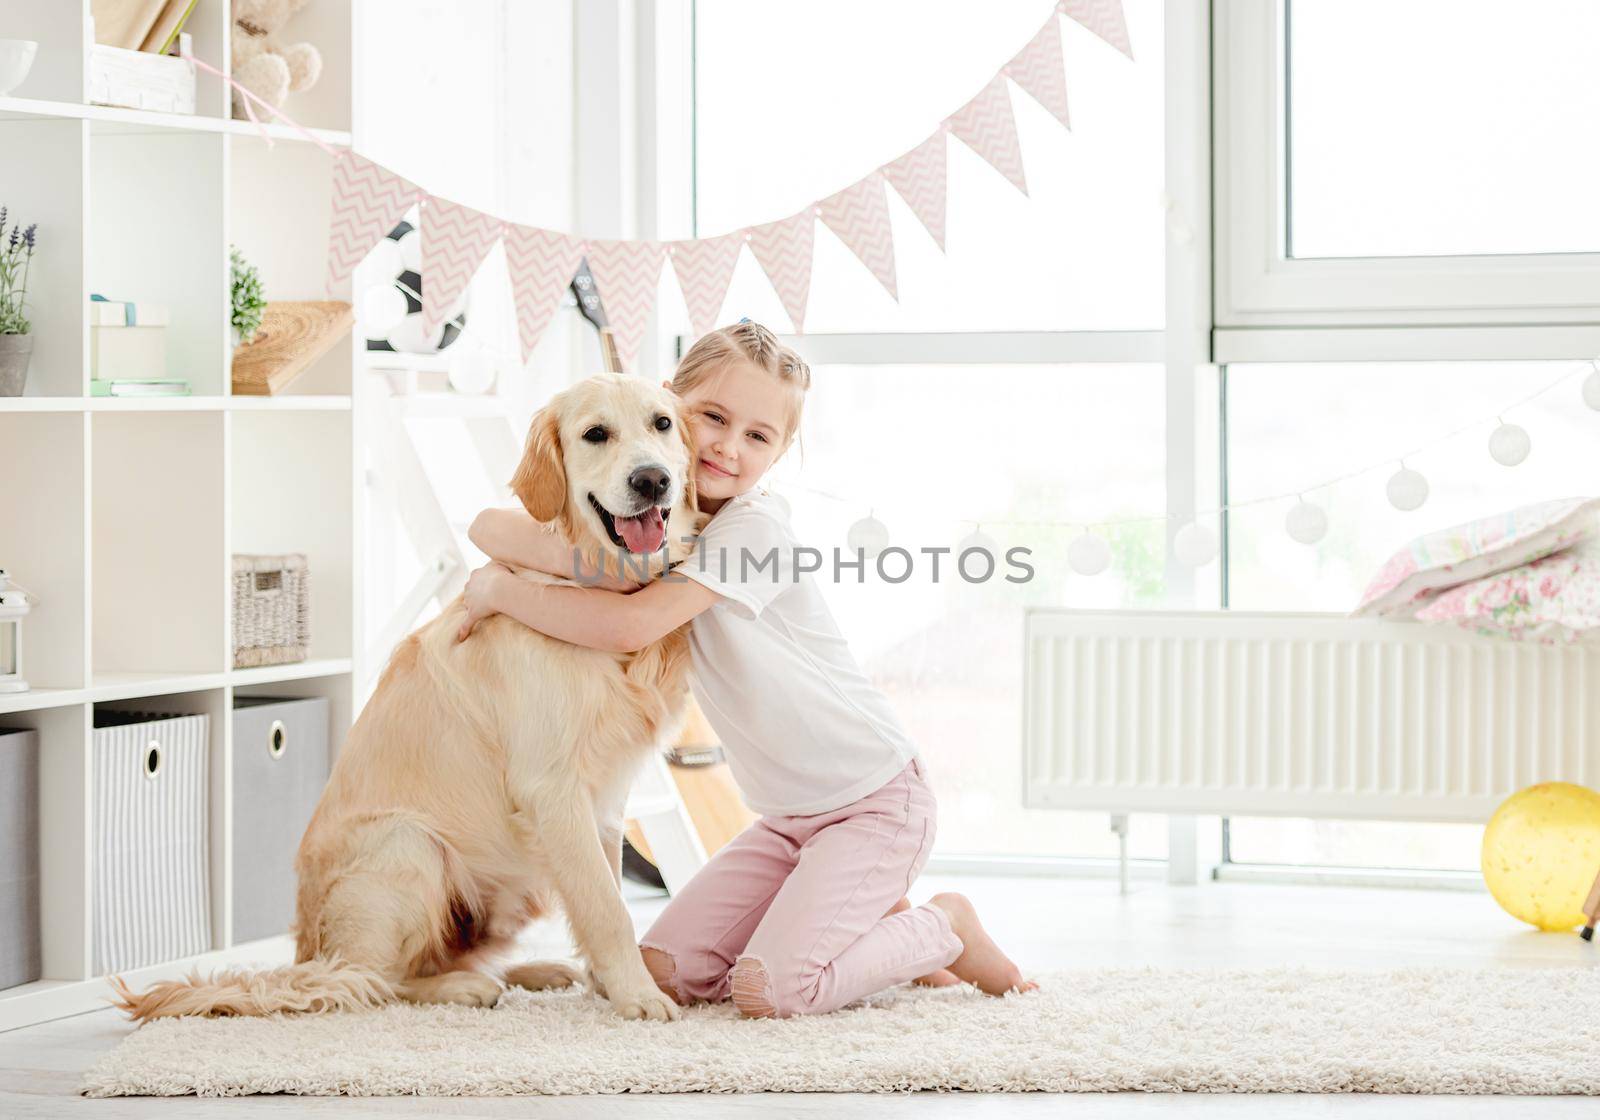 Pretty little girl embracing cute dog in light playroom